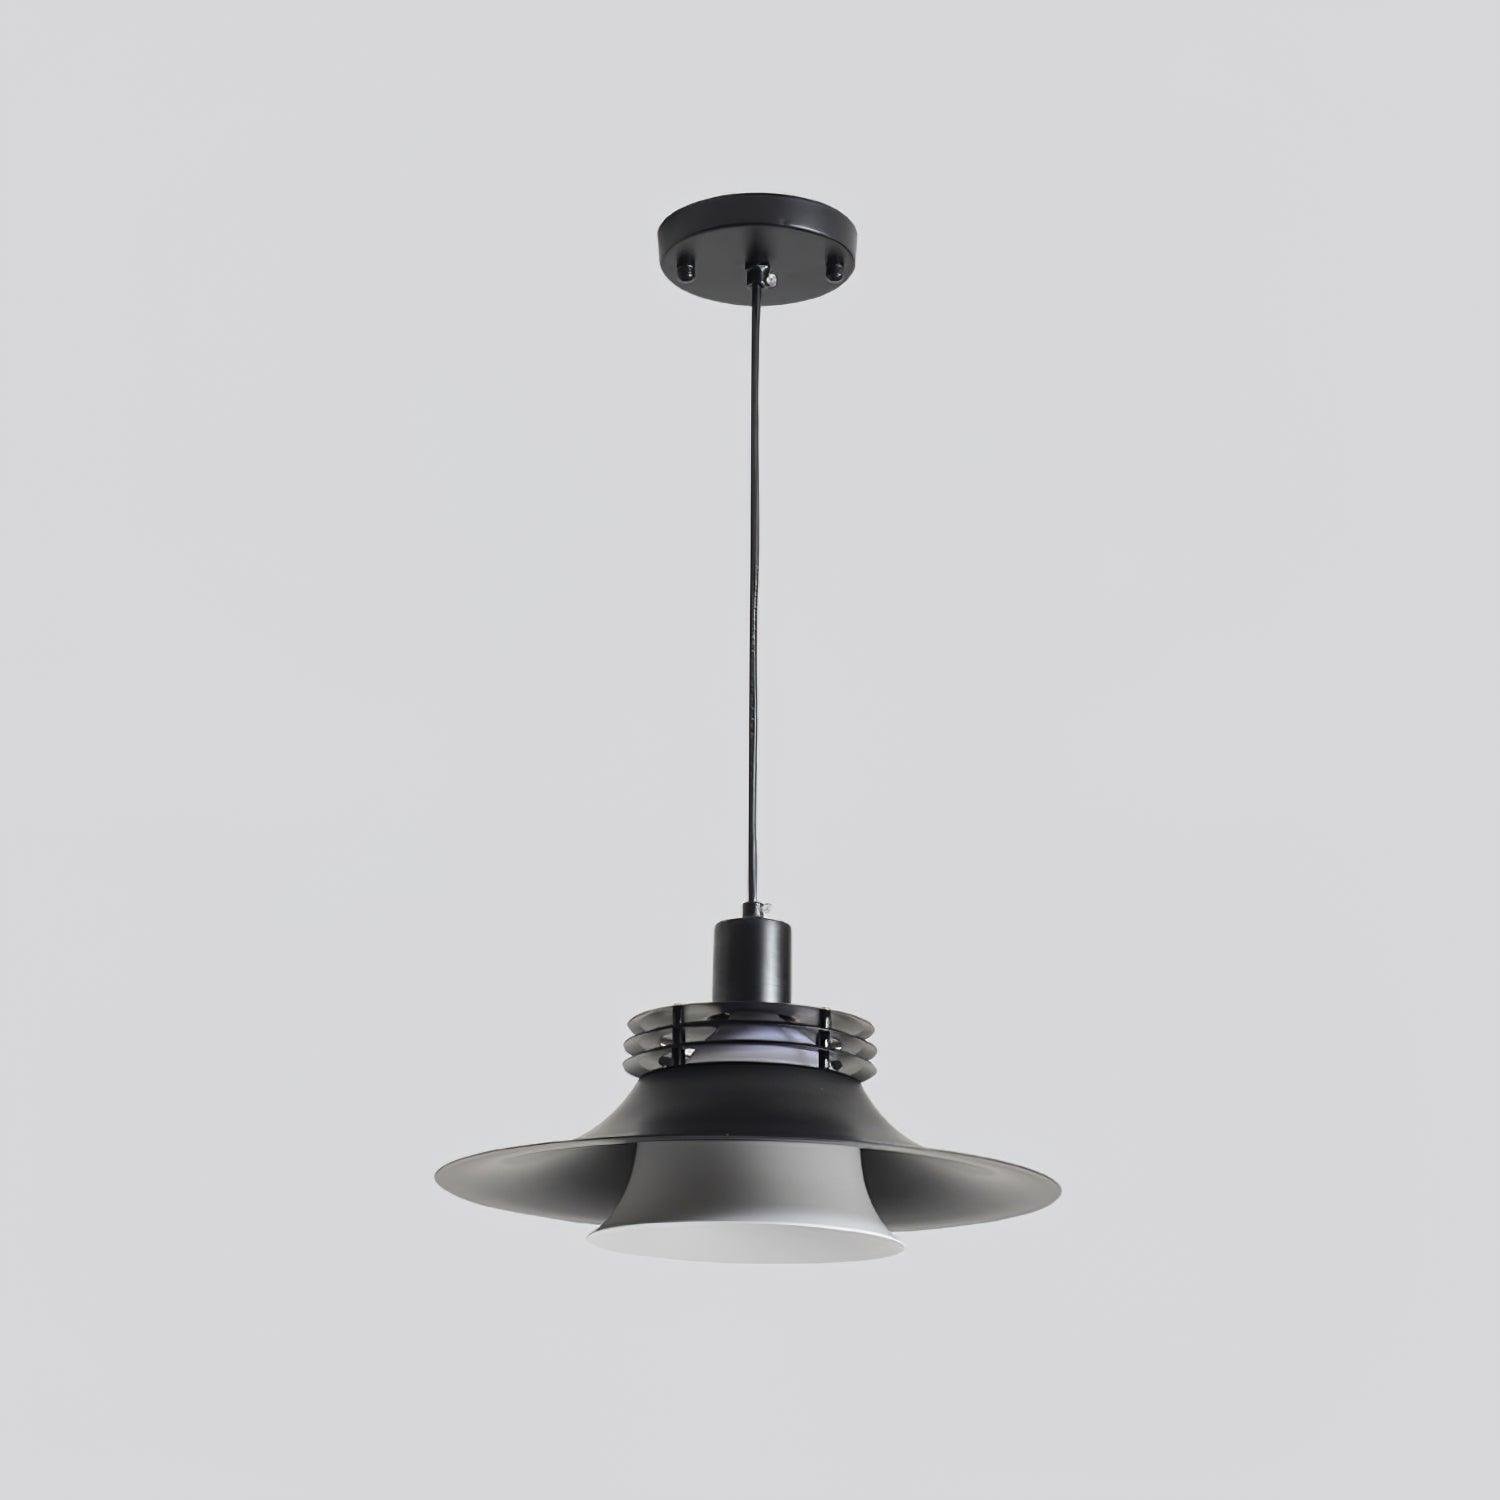 Black Lyfa Pendant Light in a diameter of 13.8 inches and height of 5.9 inches (35cm x 15cm)